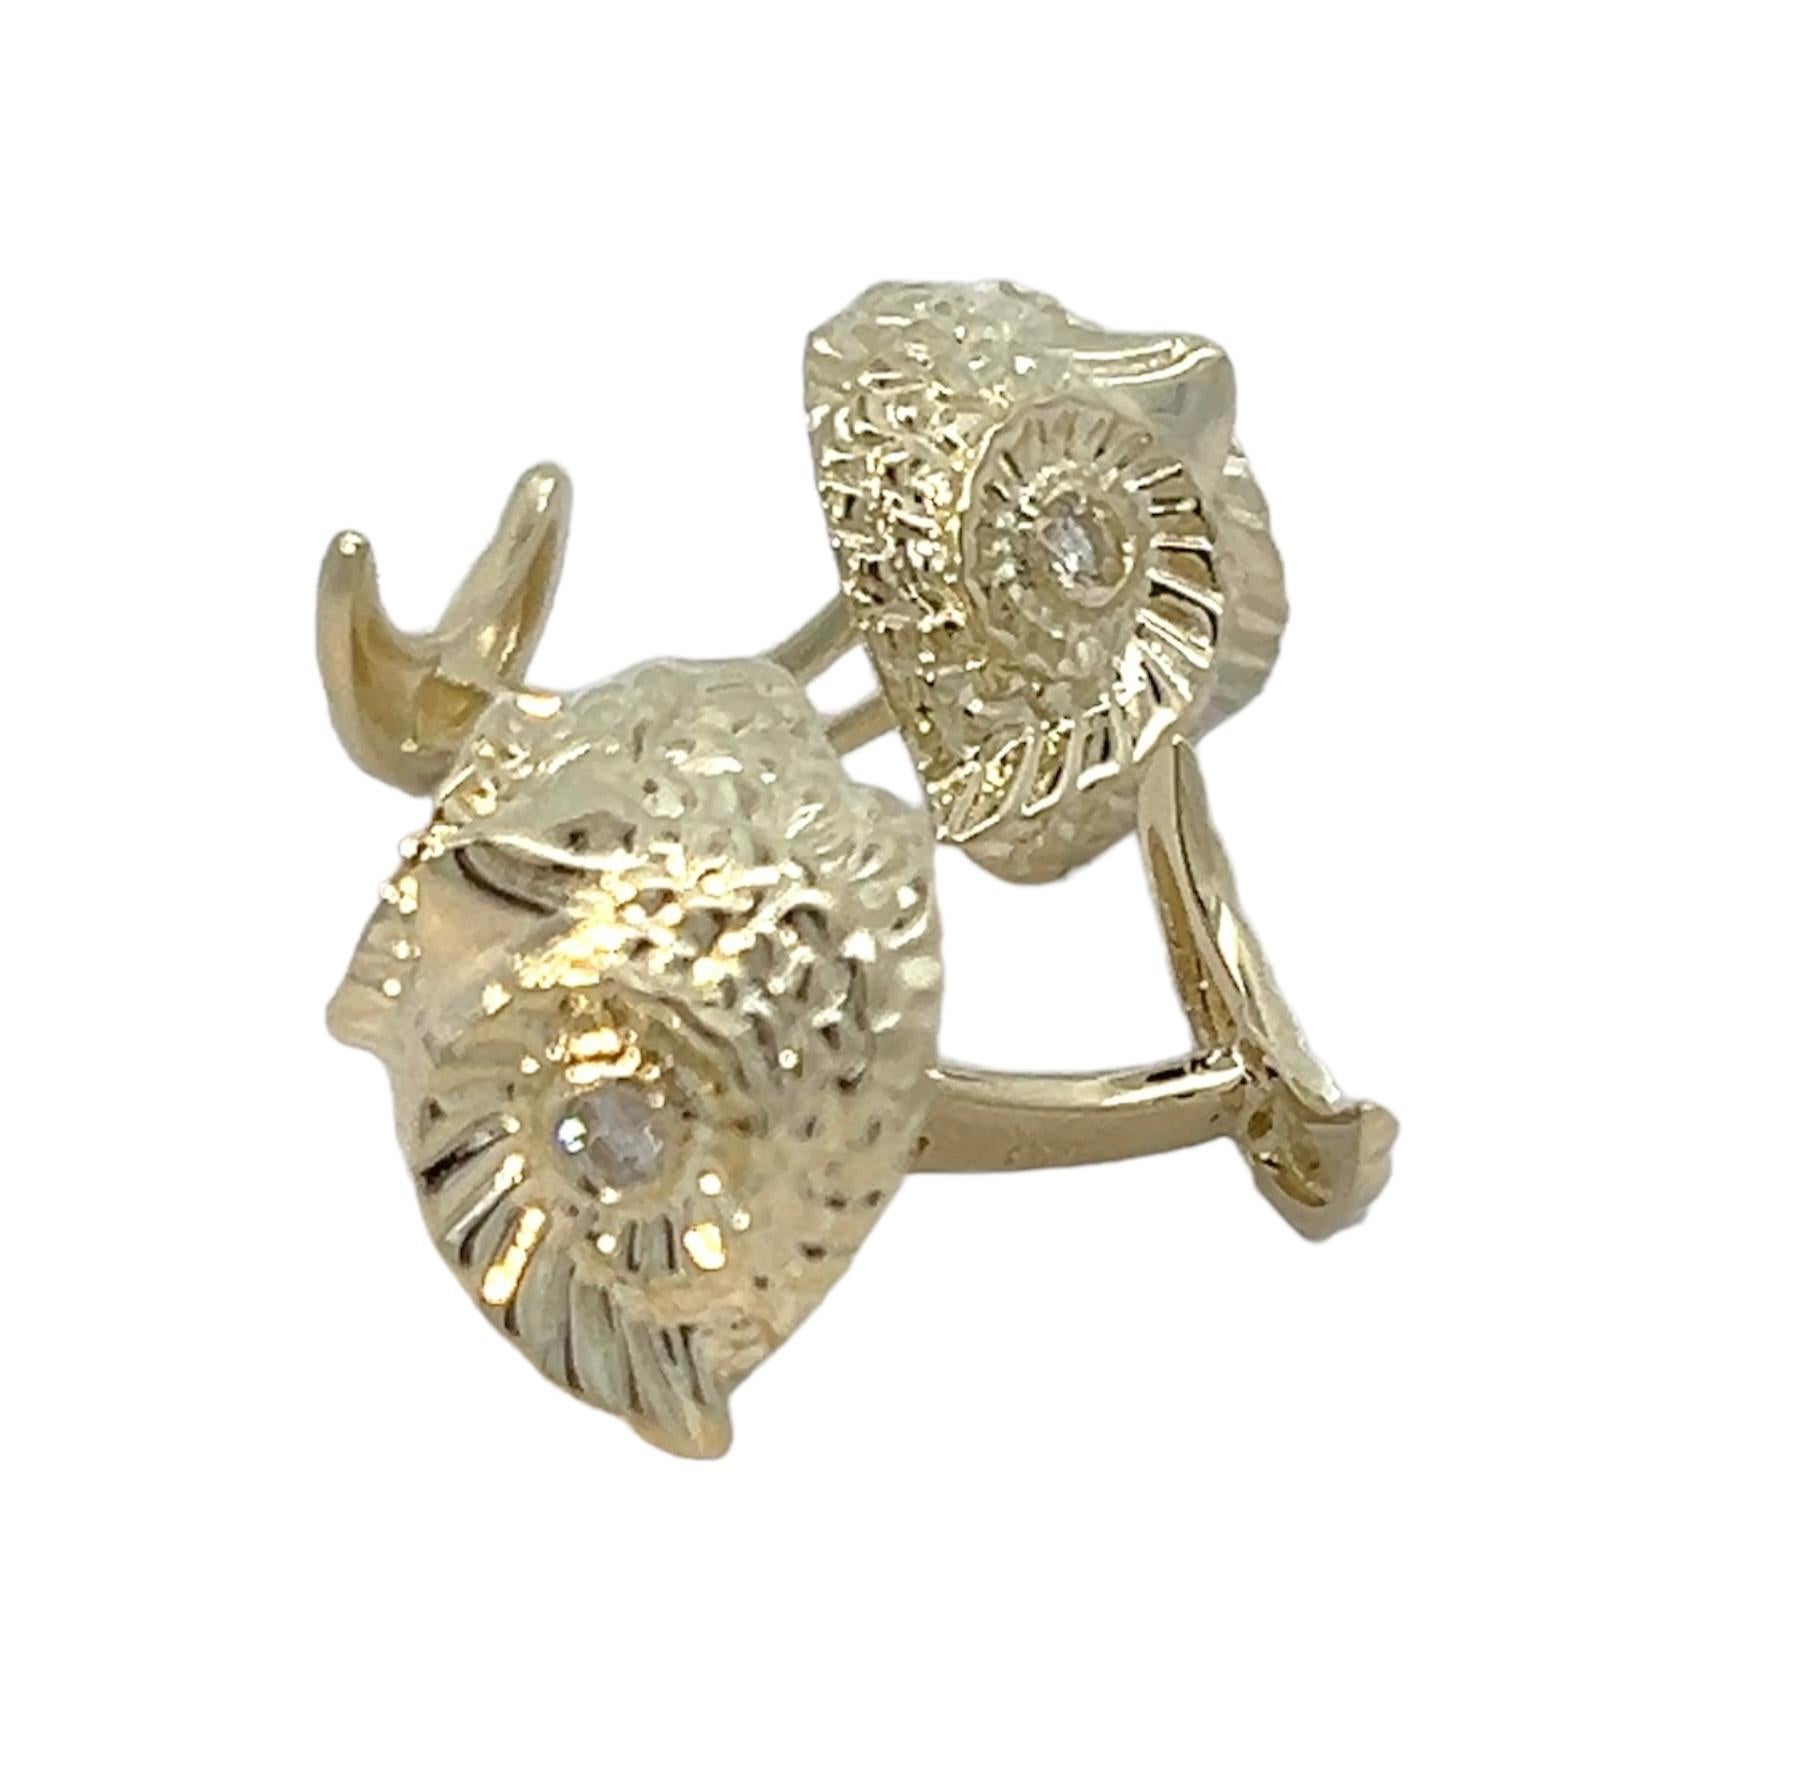 Adorn your cuffs with a touch of whimsical elegance with these exquisite 14k Yellow Gold owl cufflinks. Crafted with meticulous attention to detail, each cufflink features a charming owl motif rendered in radiant yellow gold, exuding a sense of